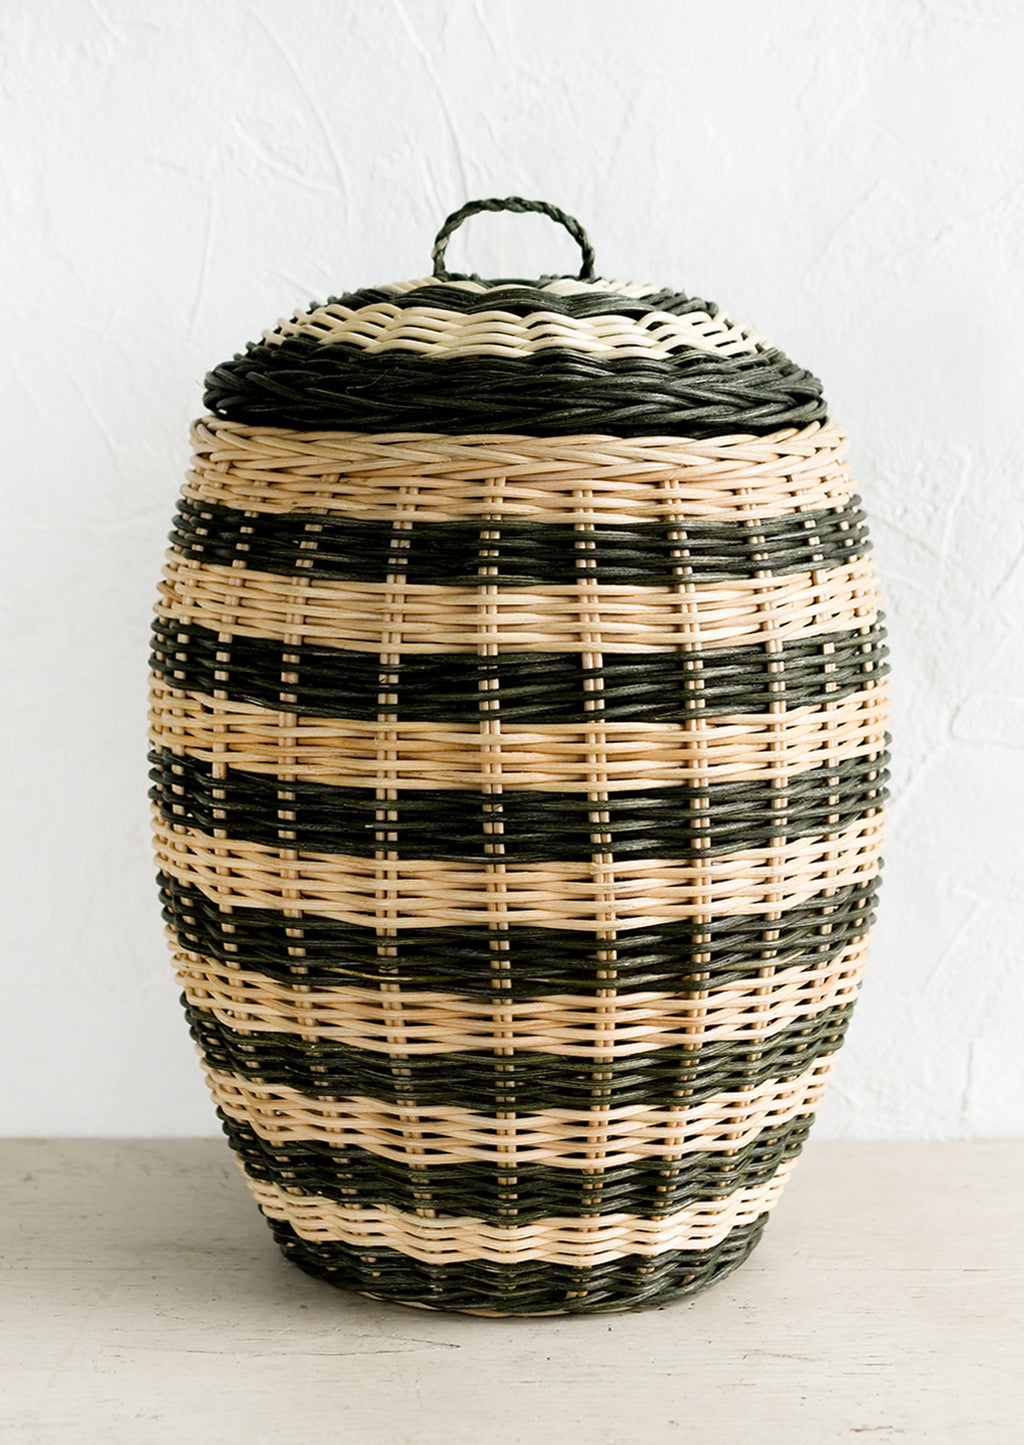 1: A tall hive shaped lidded basket in natural and dark green stripes.